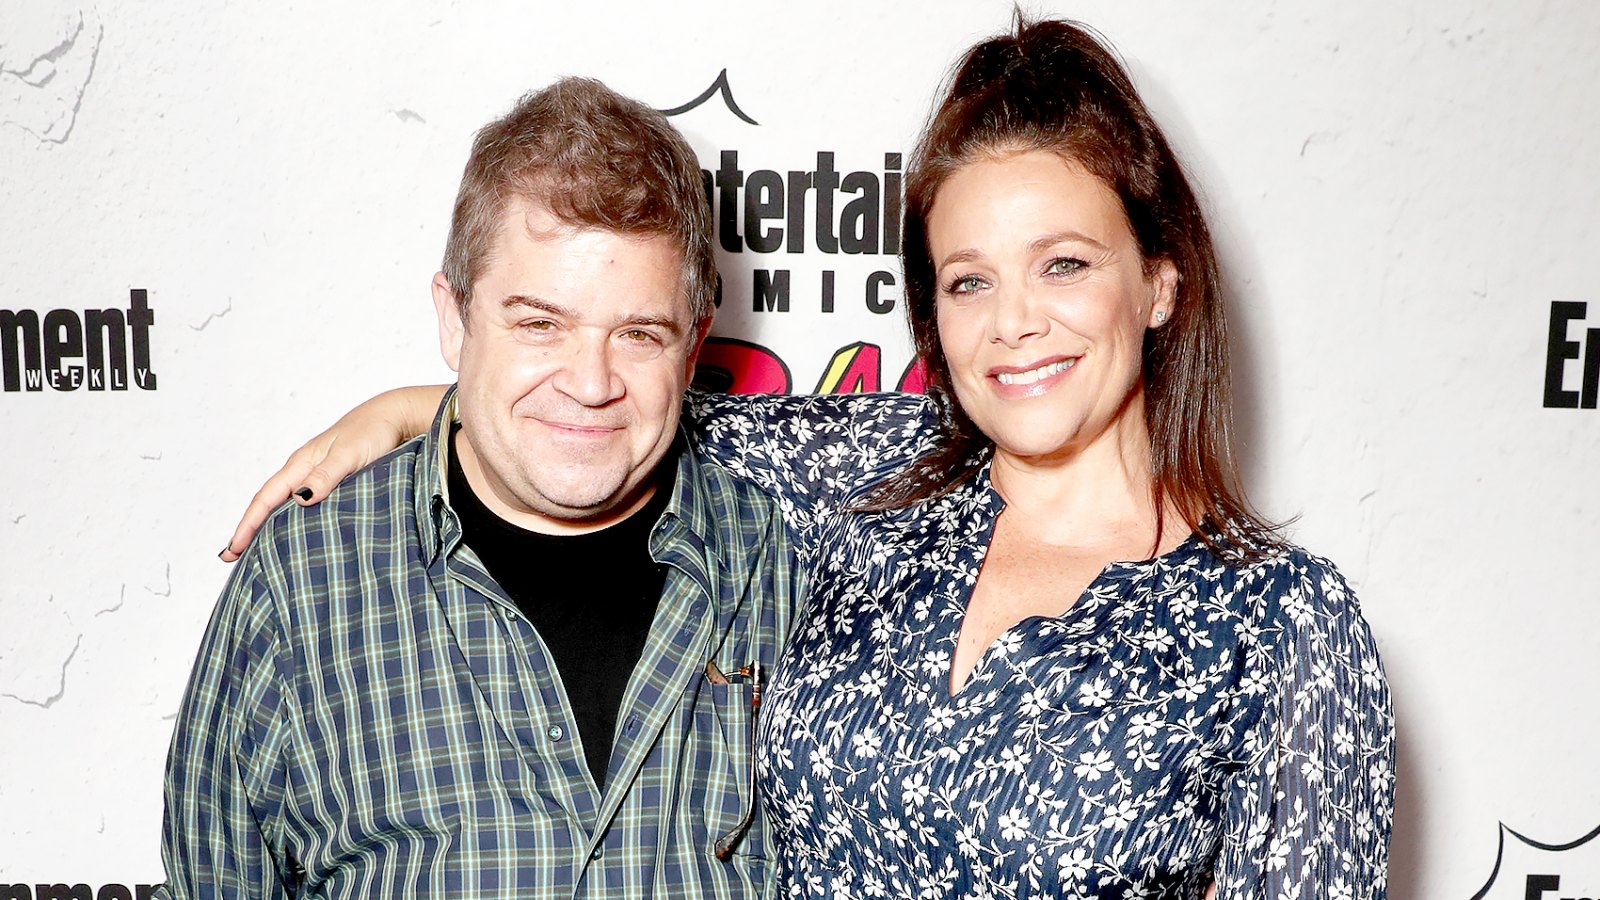 Patton Oswalt and Meredith Salenger at Entertainment Weekly's annual Comic-Con party in celebration of Comic-Con 2017 at Float at Hard Rock Hotel San Diego on July 22, 2017 in San Diego, California.